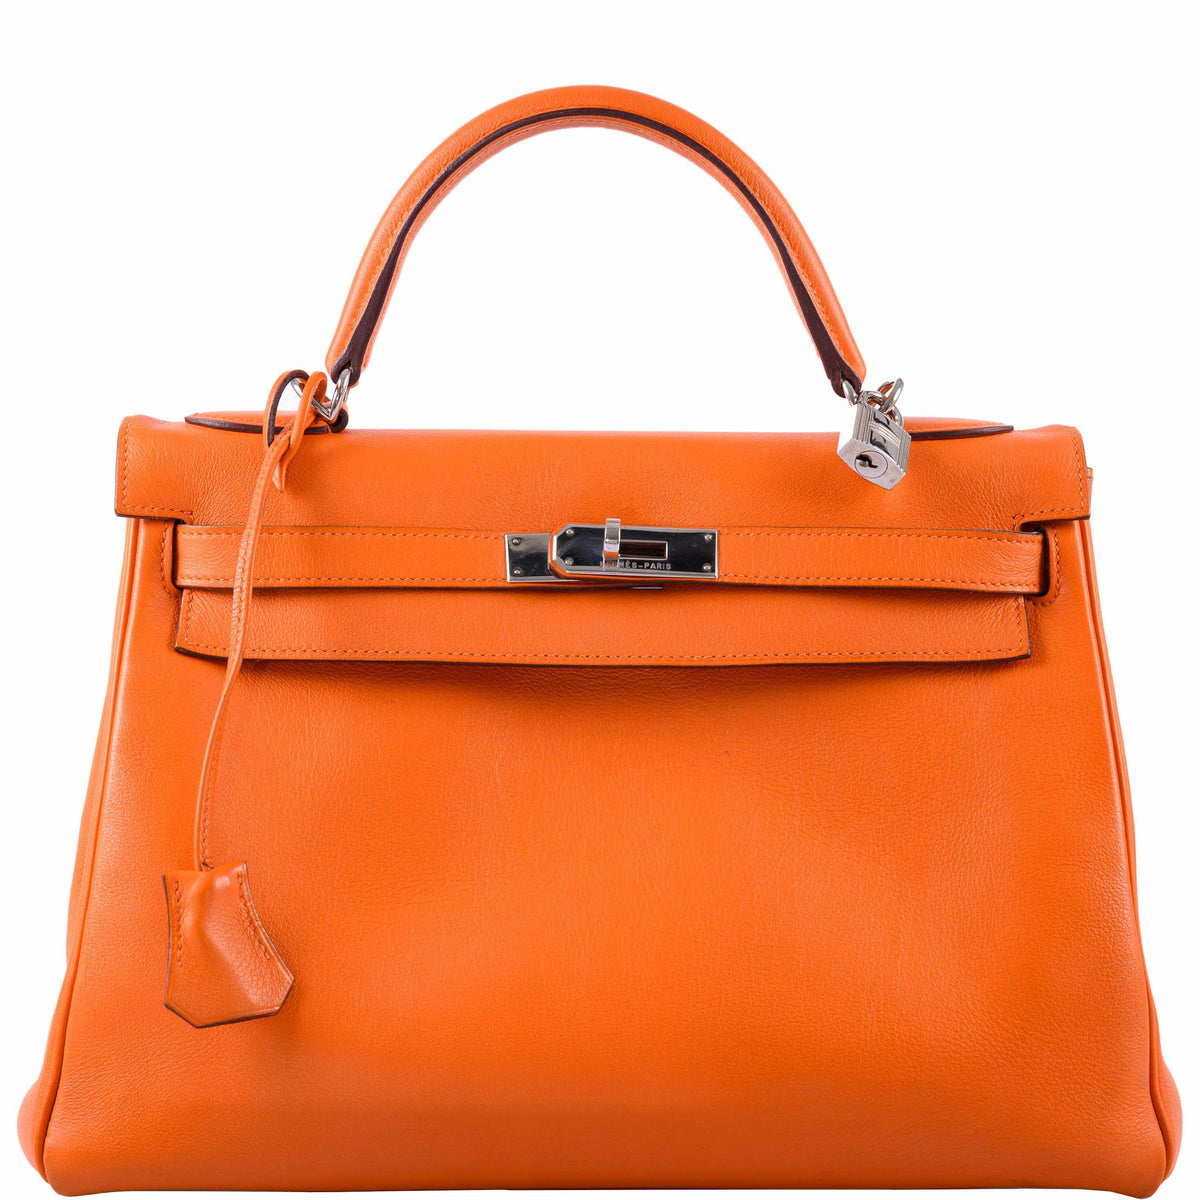 32 How to wear a Hermes Kelly ideas